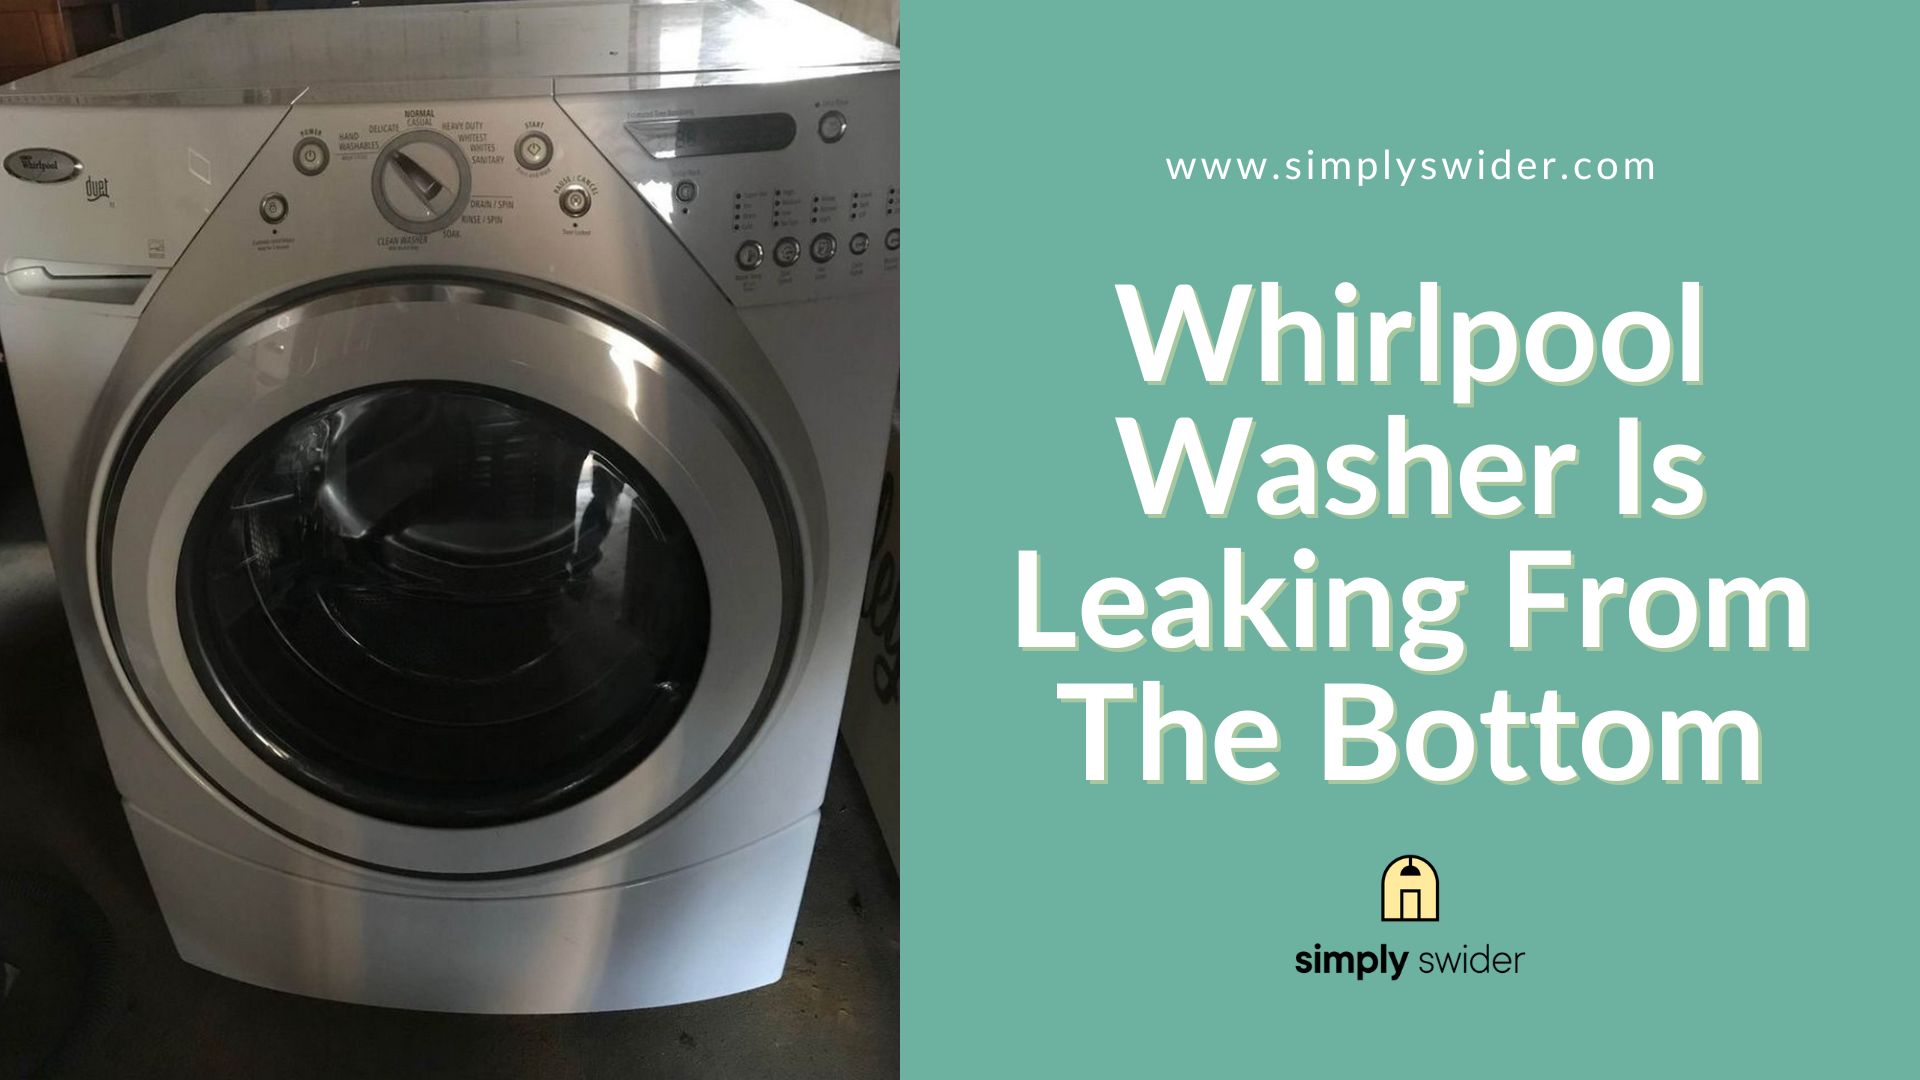 Whirlpool Washer Is Leaking From The Bottom